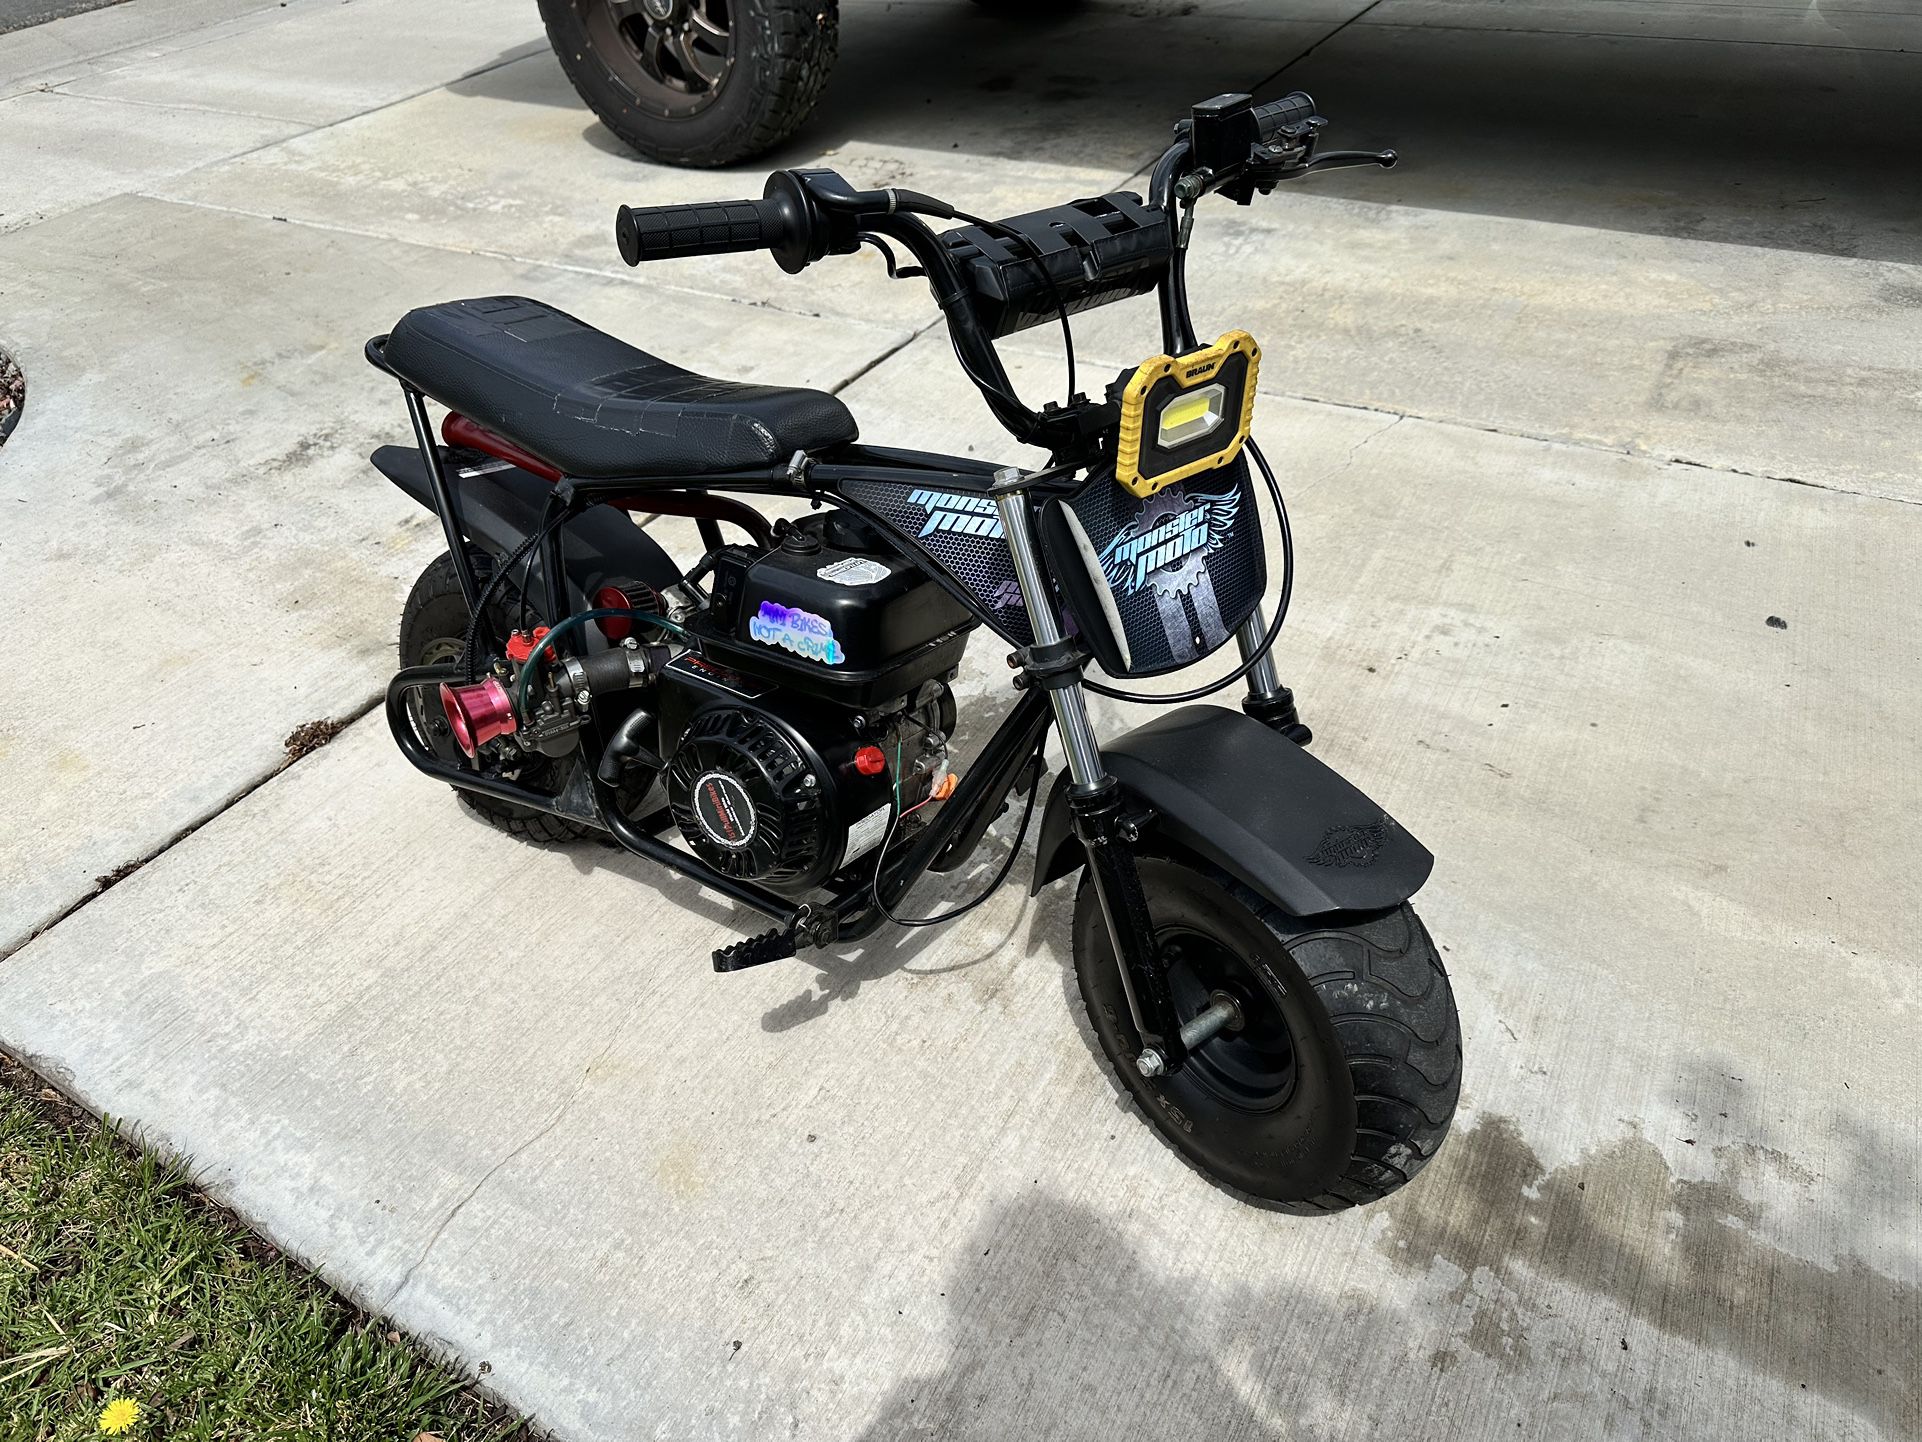 Fast Mini Bike Built! If Ad Up It’s Still Available!